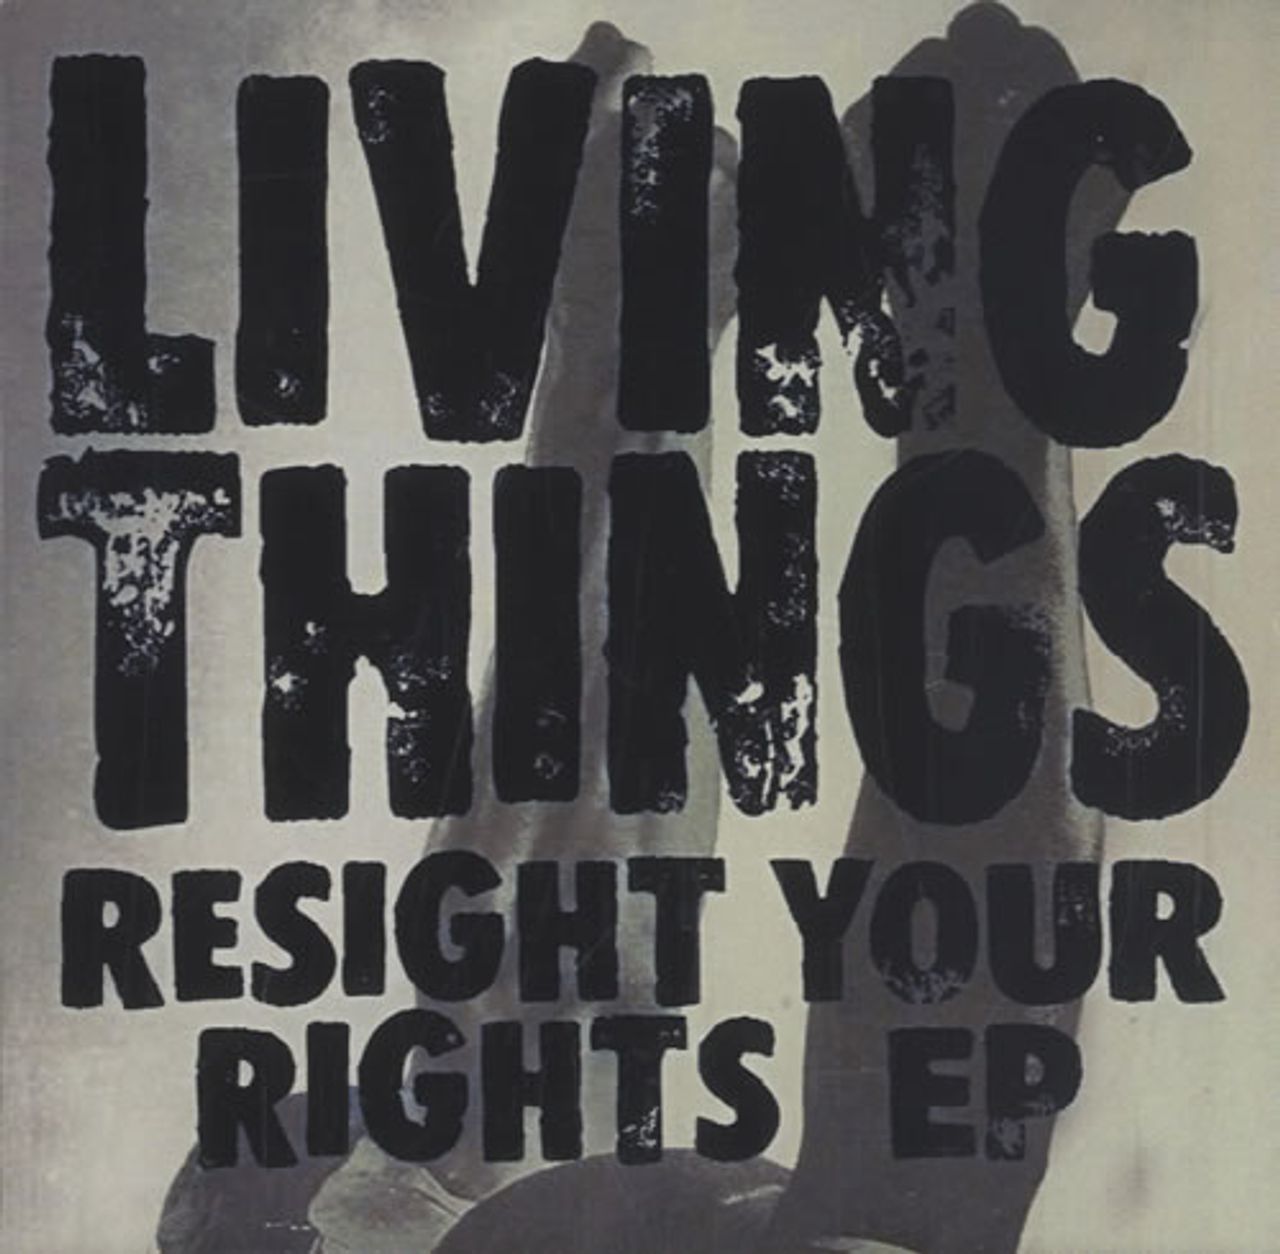 Living Things Resight Your Rights EP US Promo CD single (CD5 / 5") DRMR-14252-2